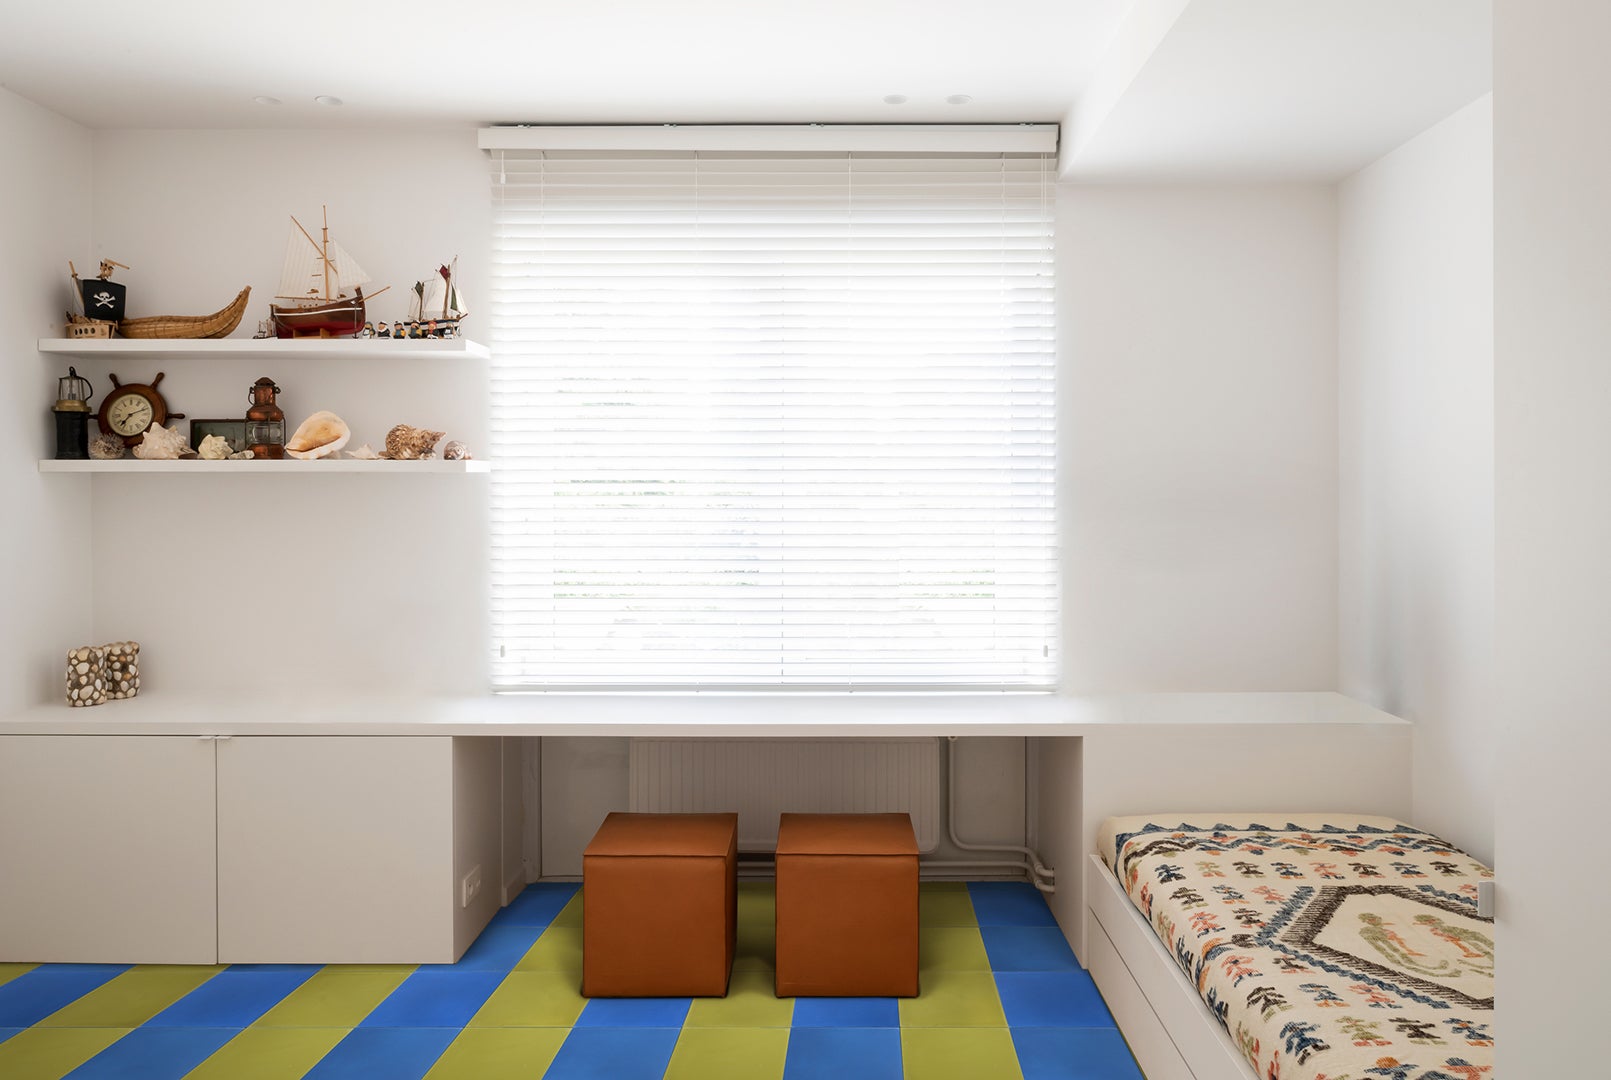 kid's bedroom with green and blue striped tile floors.